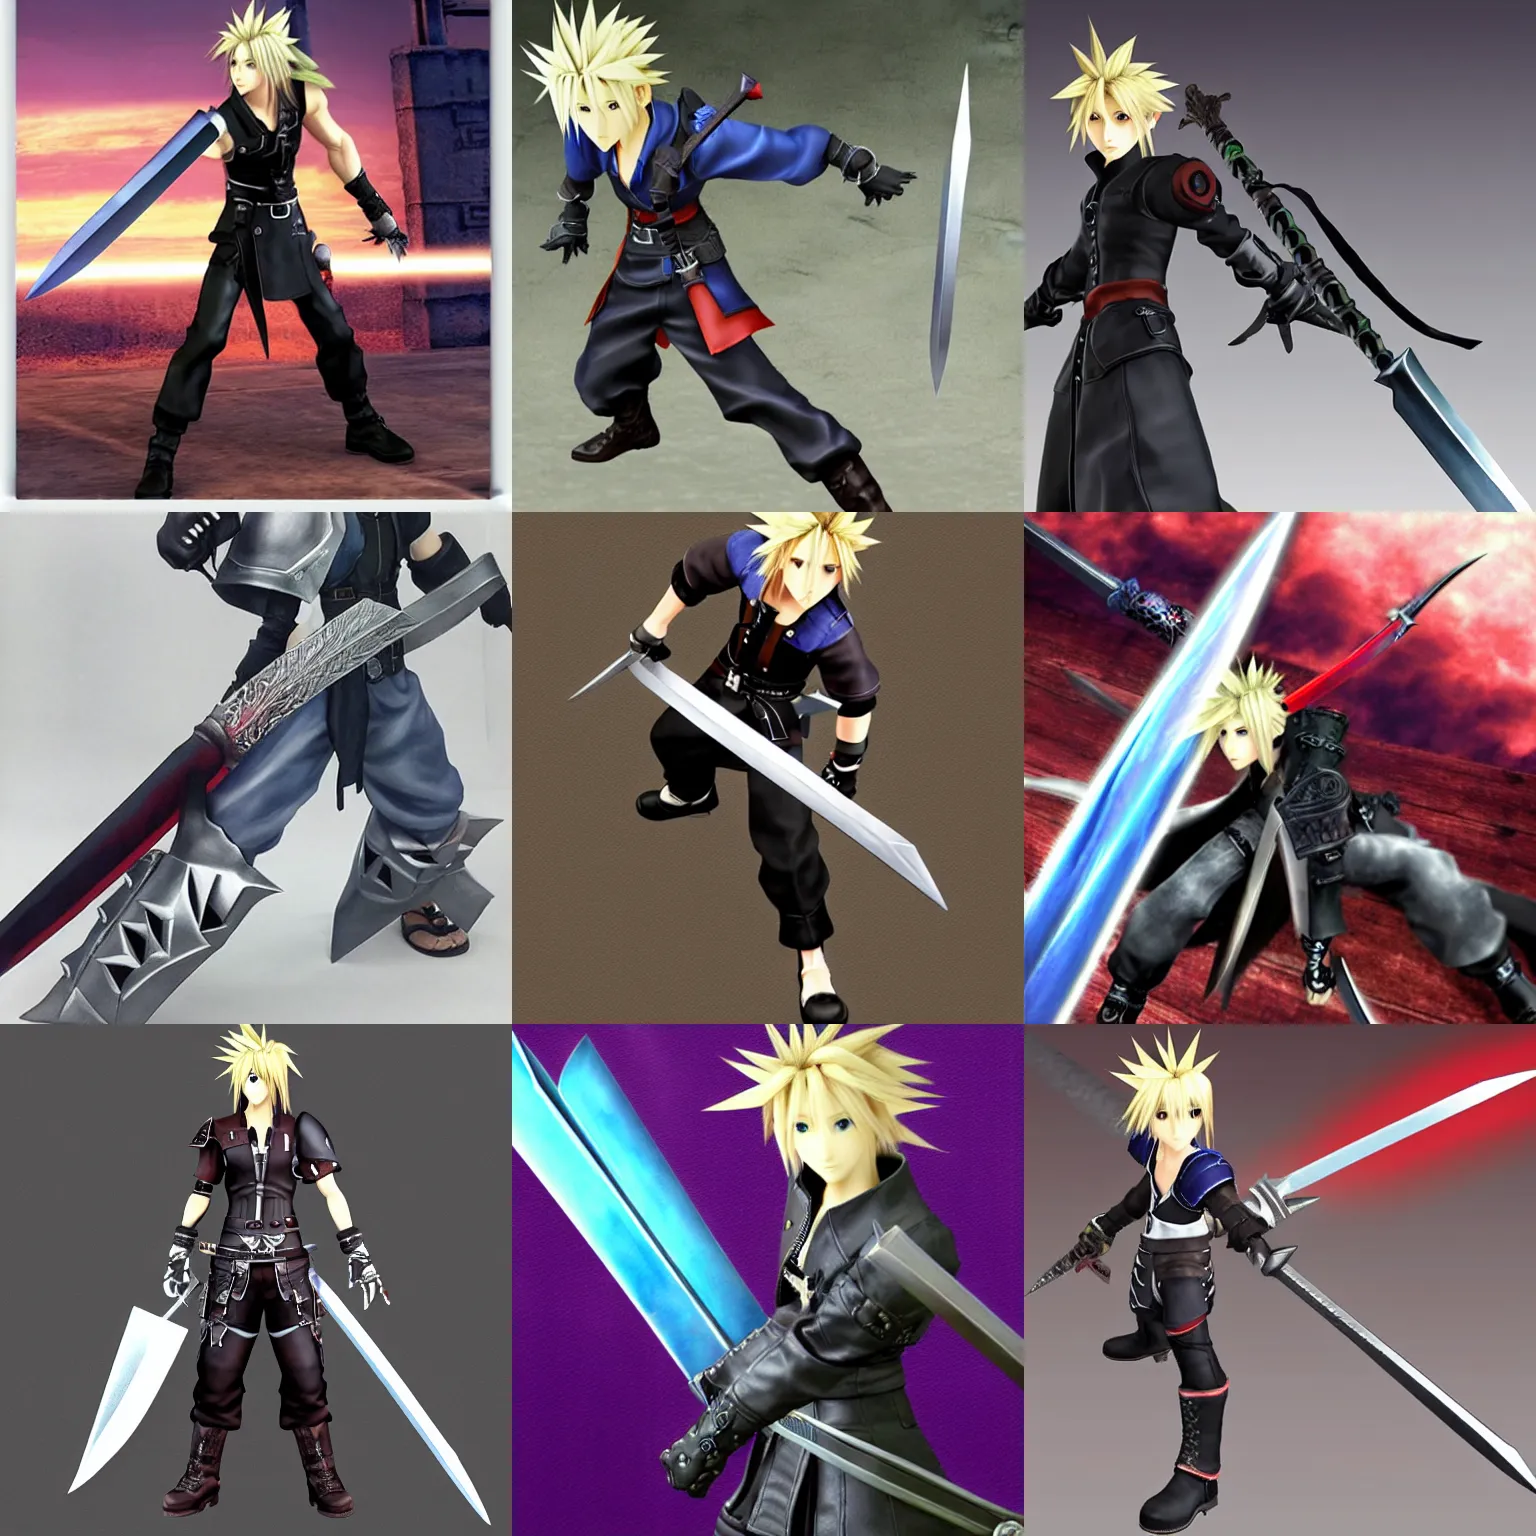 Prompt: cloud strife brave sword stance by tetsuya nomura